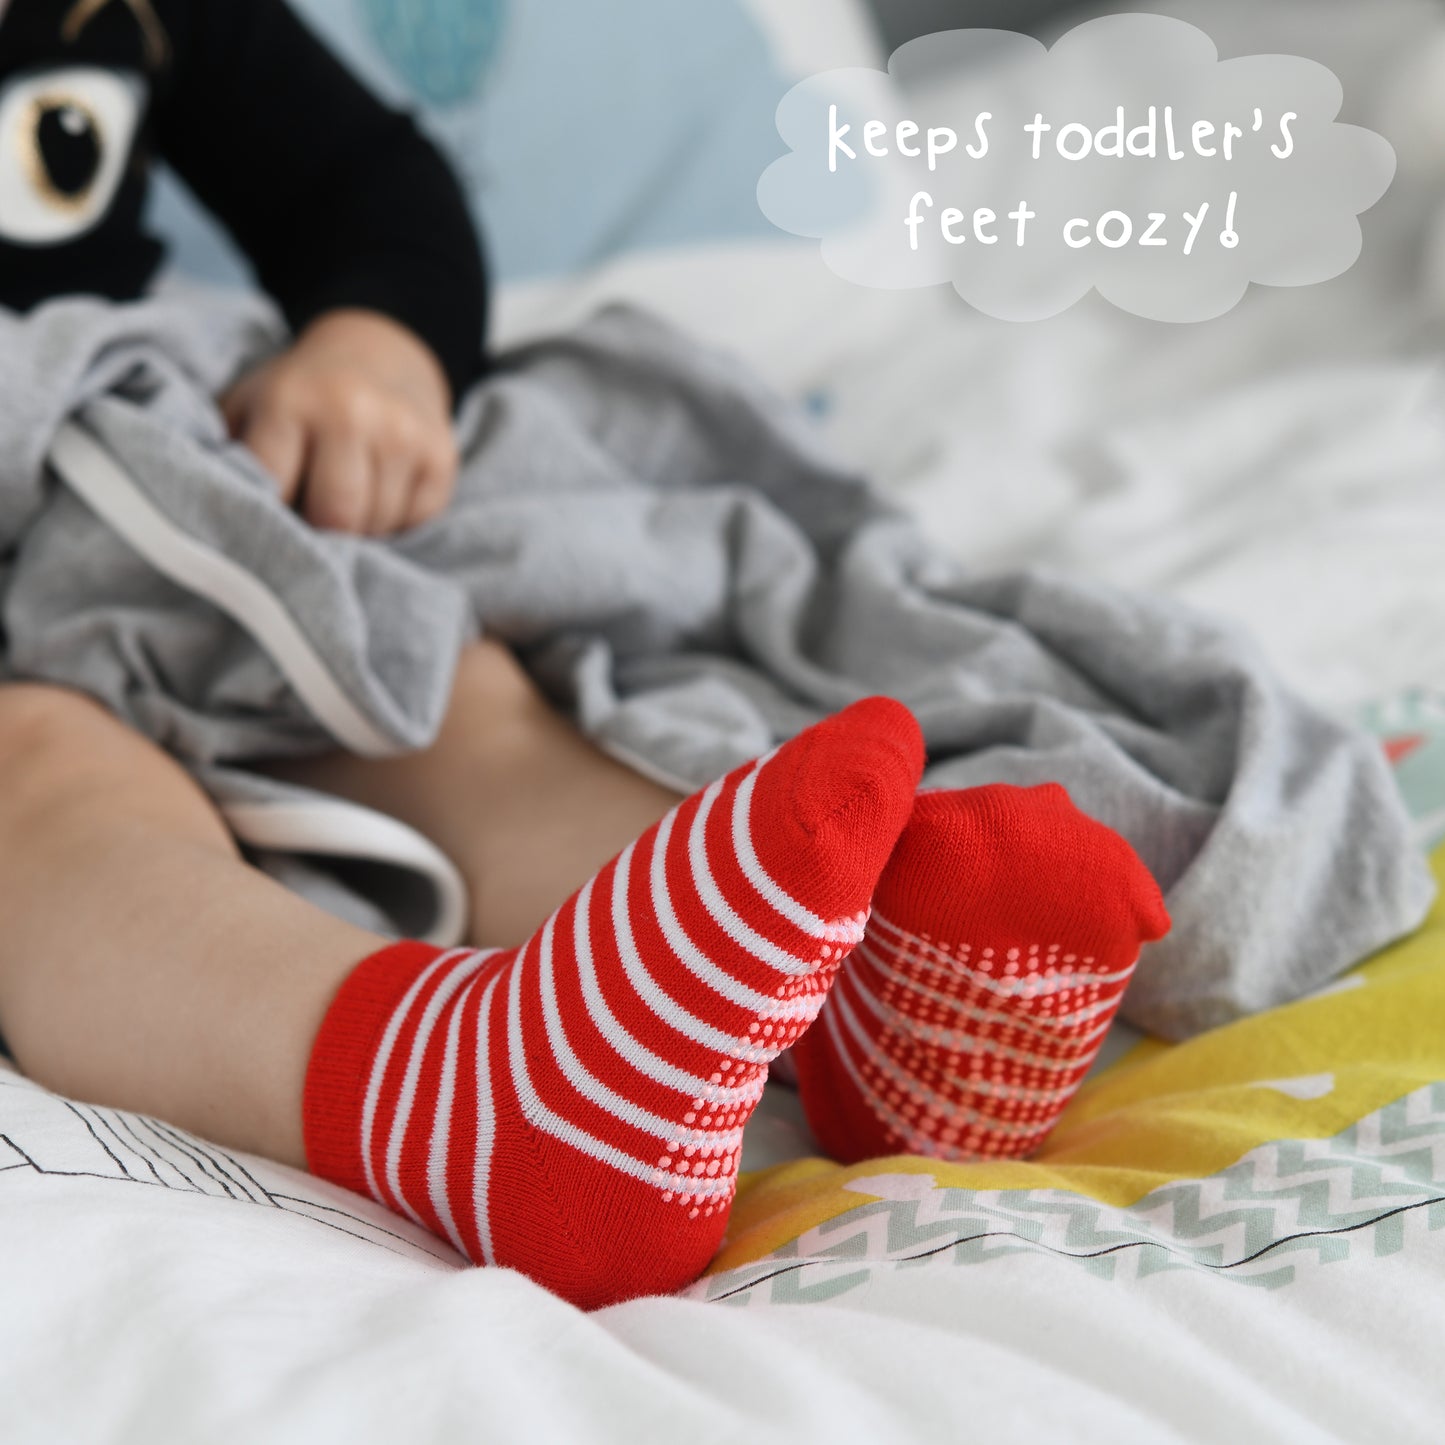 Baby and Toddler Crew Socks- 12 Pairs